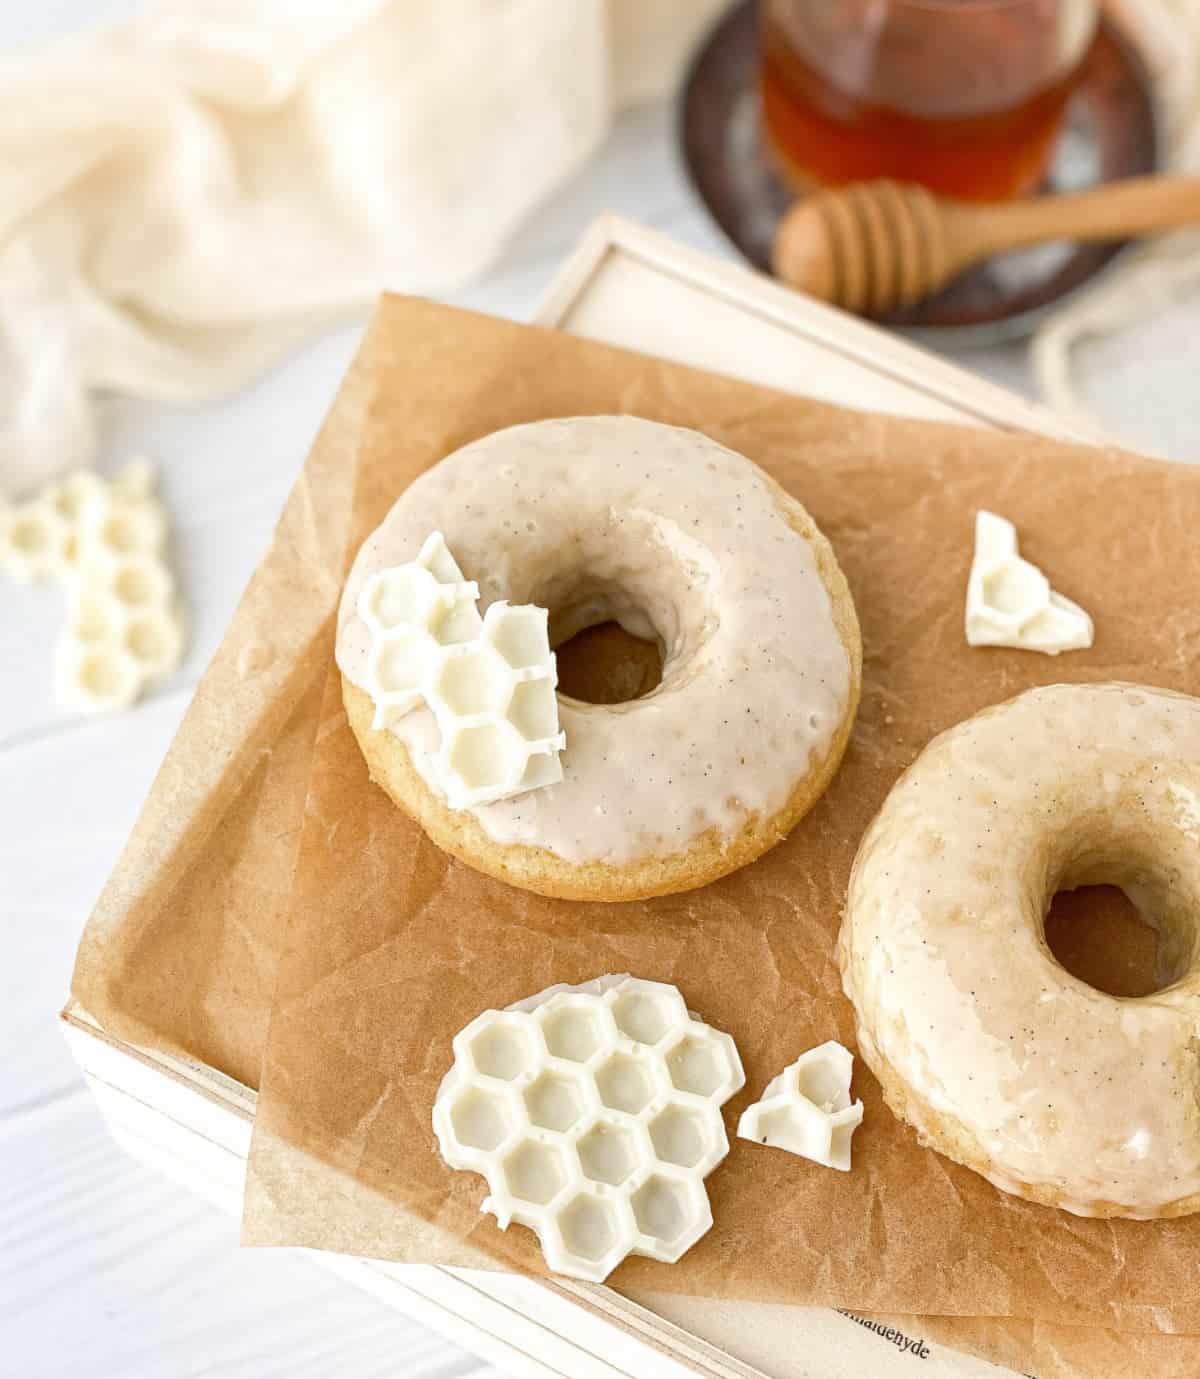 Honey donuts with vanilla honey glaze on parchment paper.